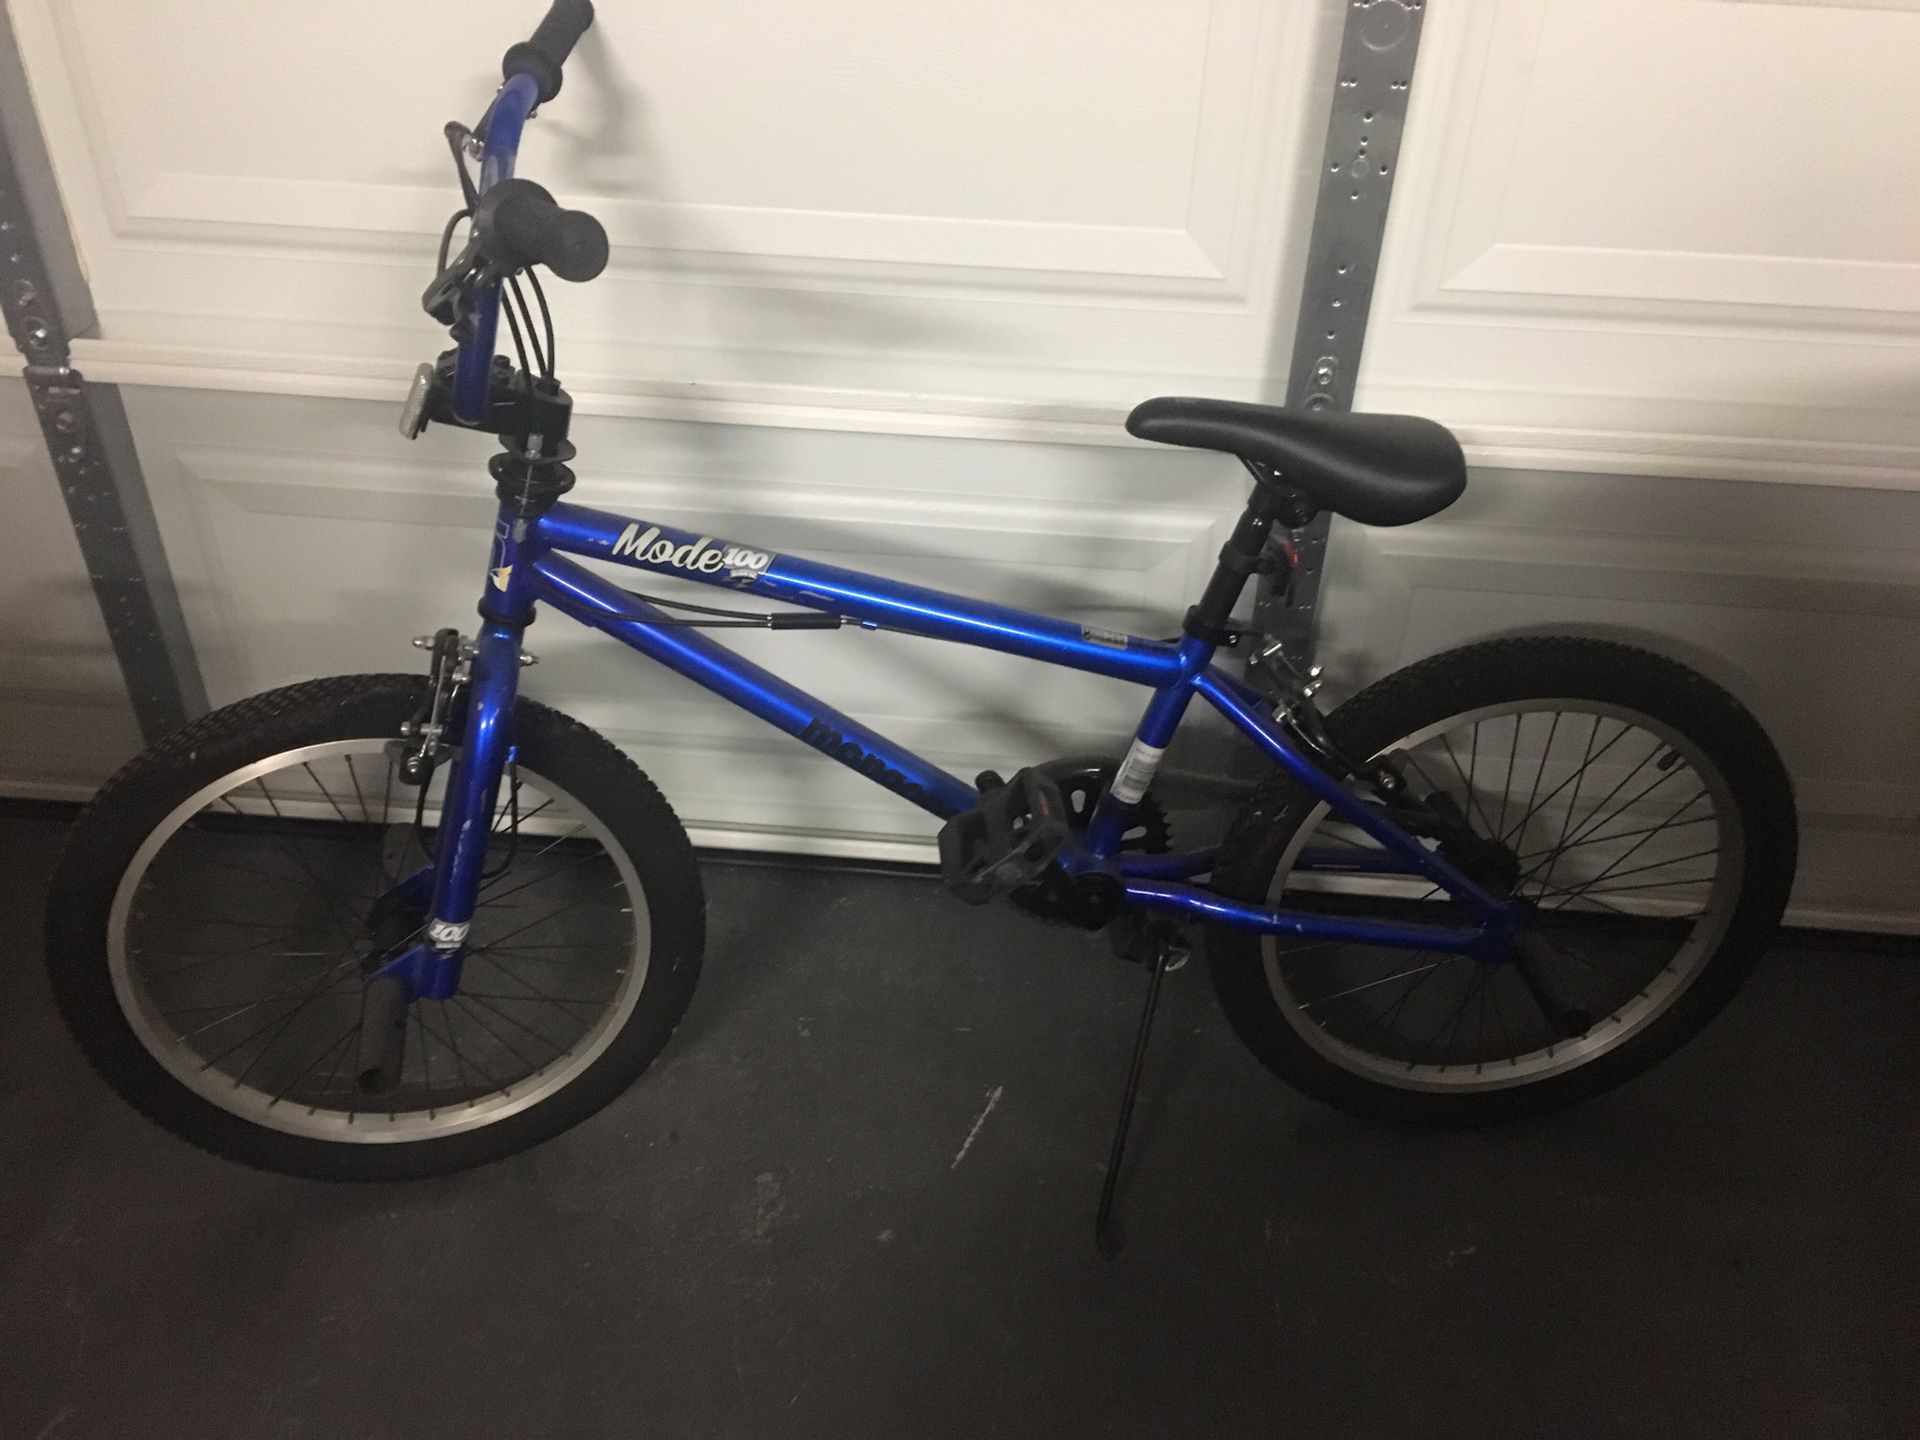 Child size Blue Bicycle